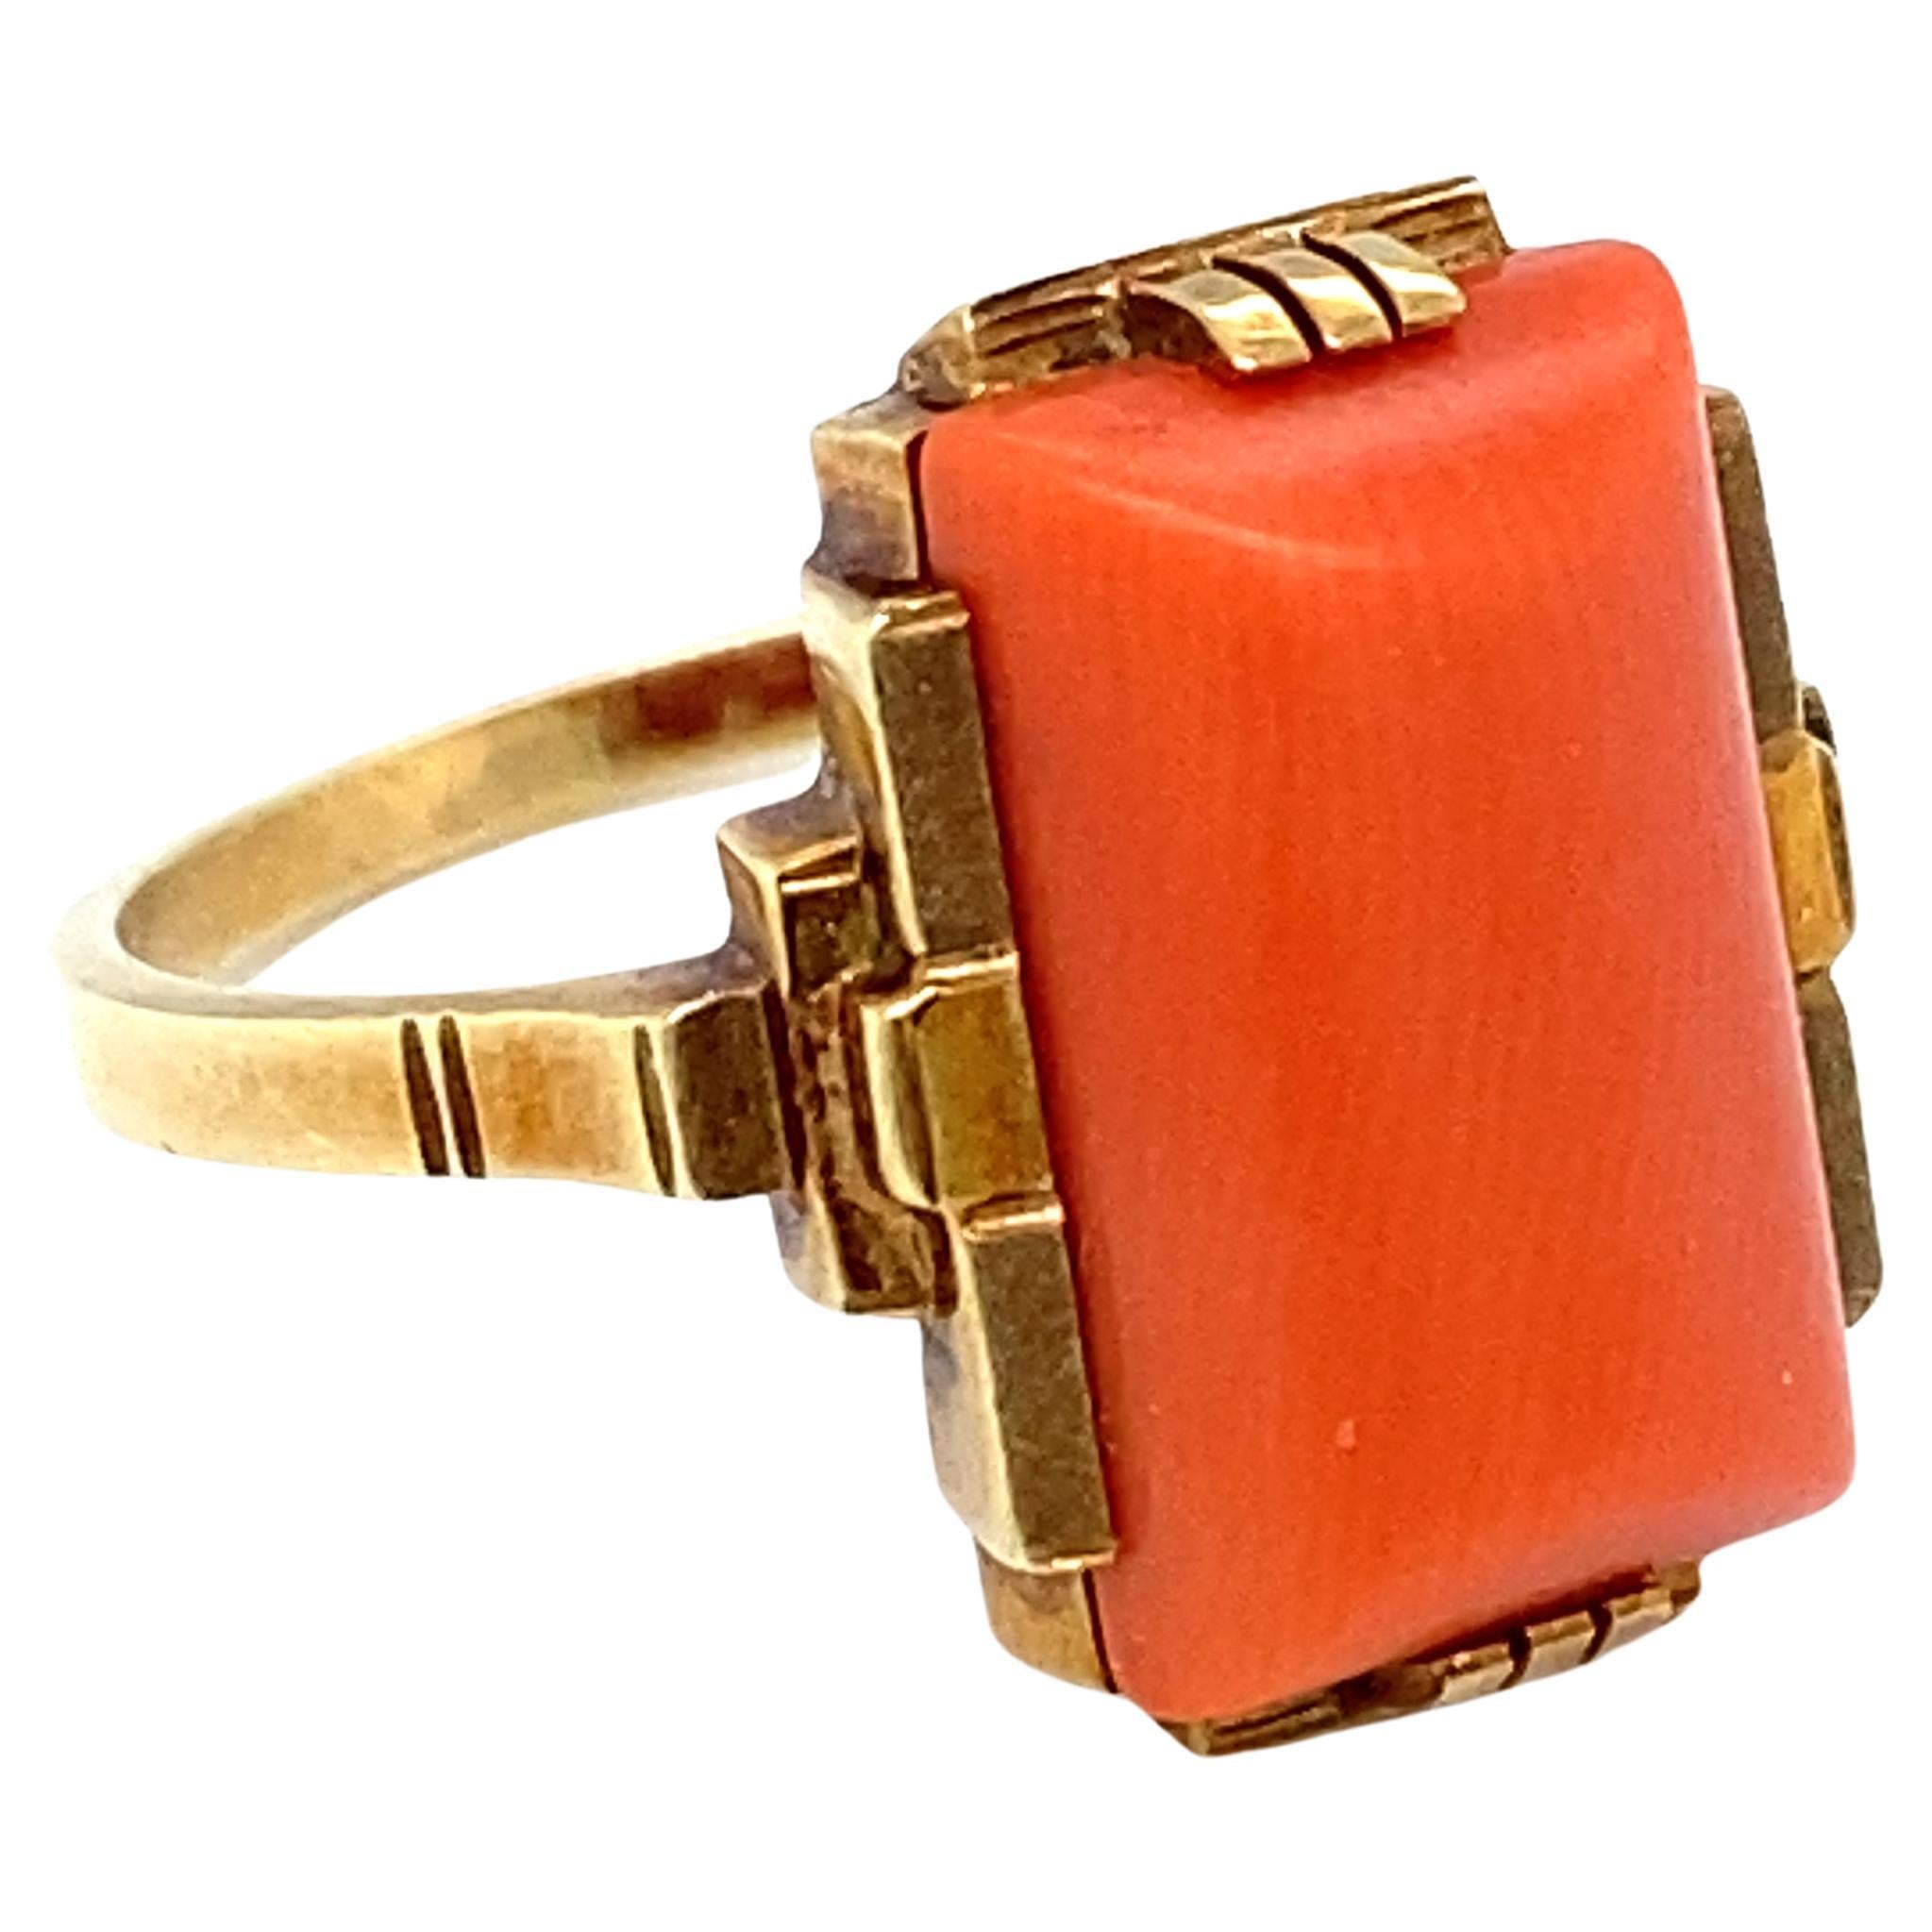 Circa 1940s Art Deco Style Rectangular Coral Ring in 14 Karat Yellow Gold For Sale